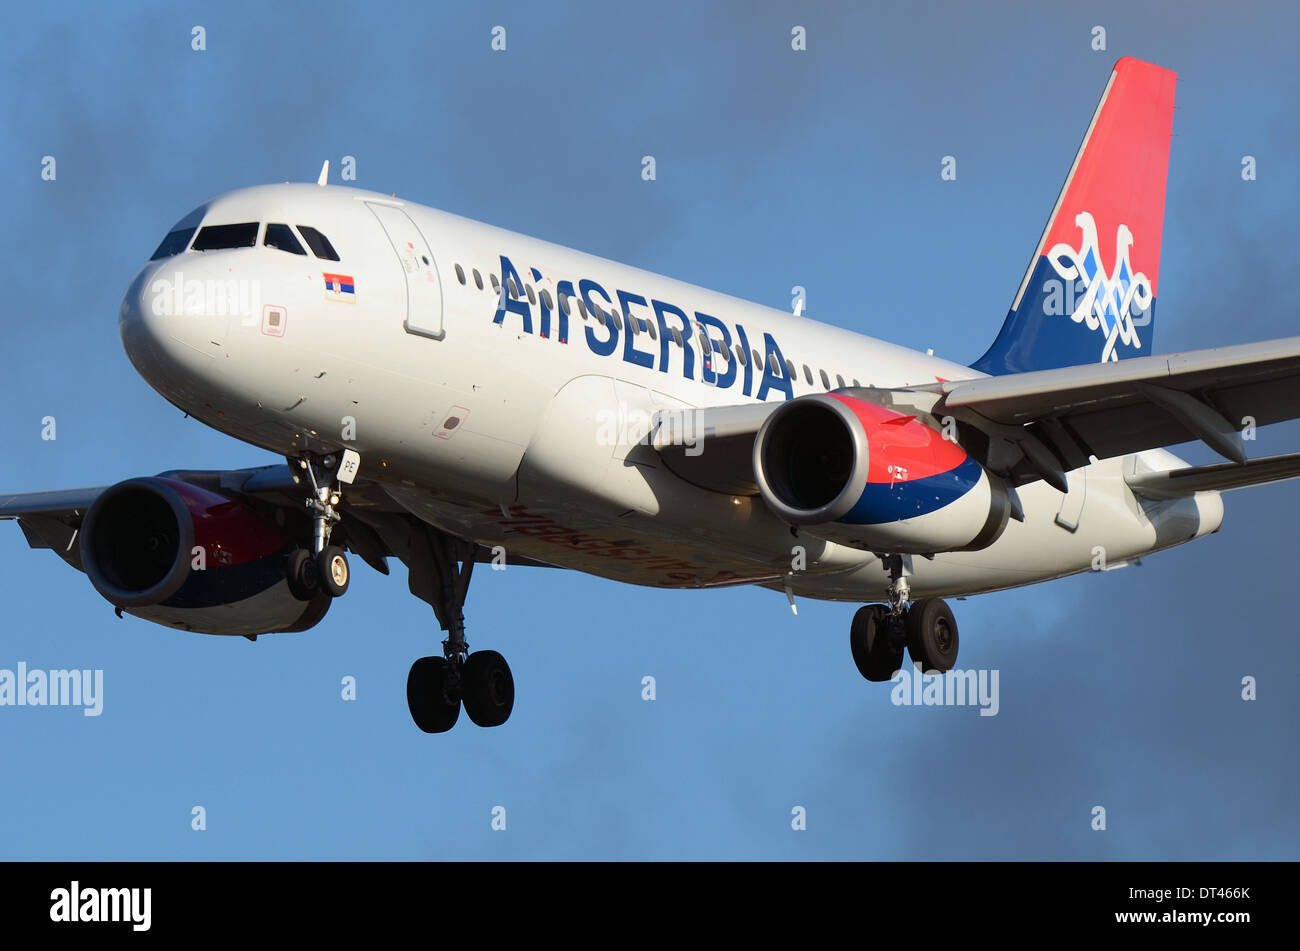 Air Serbia is the flag carrier and largest airline of Serbia. The airline was formerly known as Jat Airways. Airbus A319 jet plane YU-APE landing LHR Stock Photo